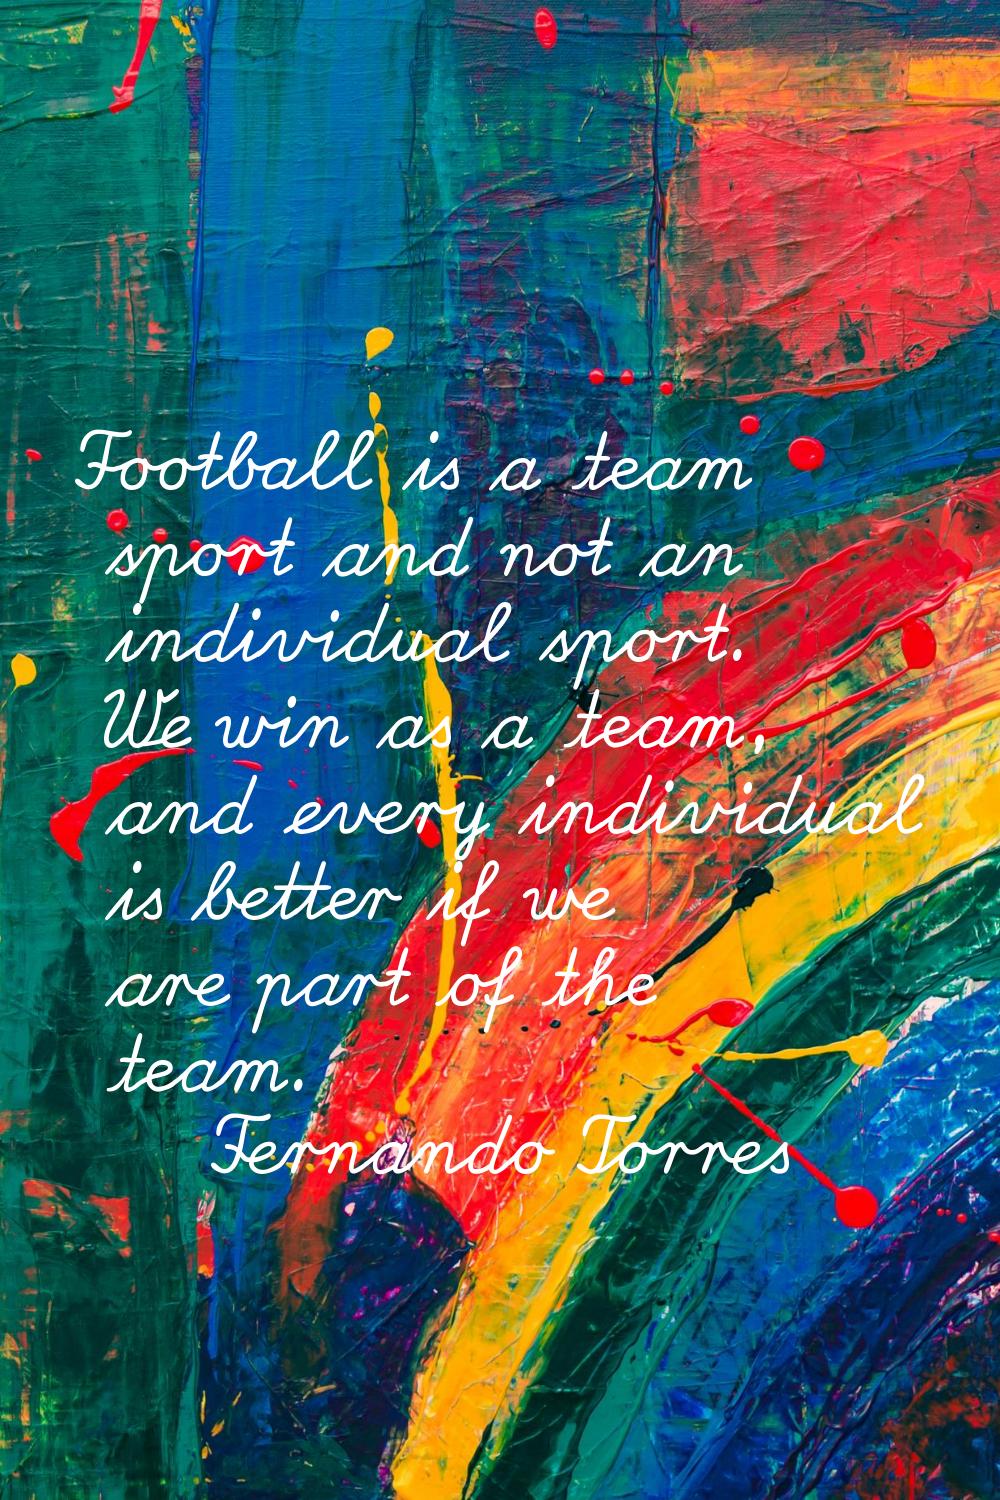 Football is a team sport and not an individual sport. We win as a team, and every individual is bet